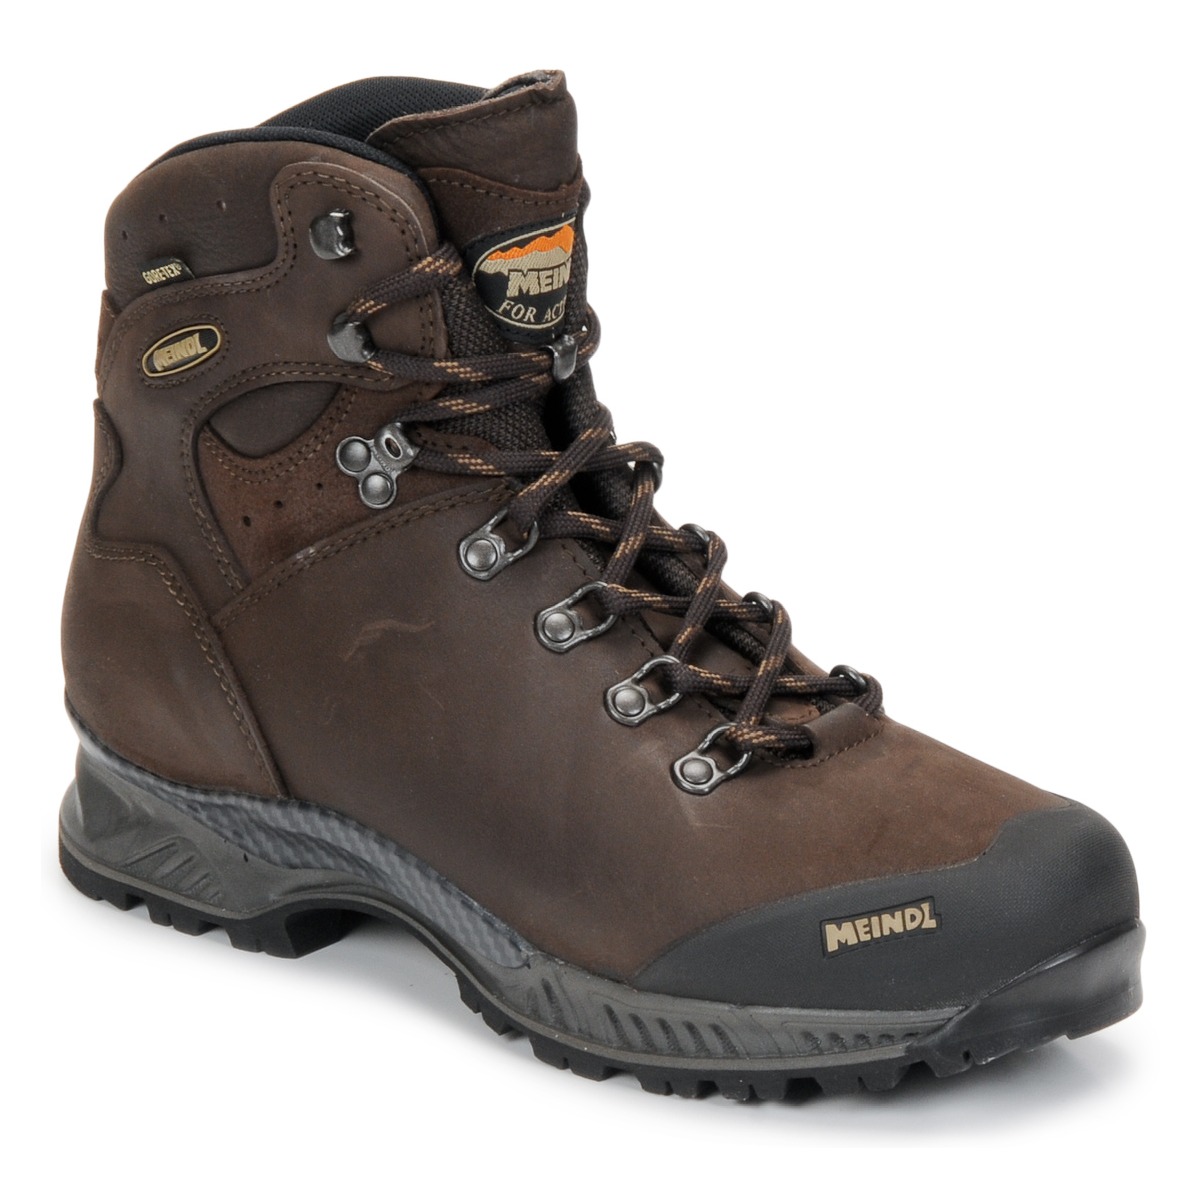 Meindl SOFTLINE TOP GORE-TEX Mocca - Free NET ! - Shoes Hiking-shoes Men USD/$277.00